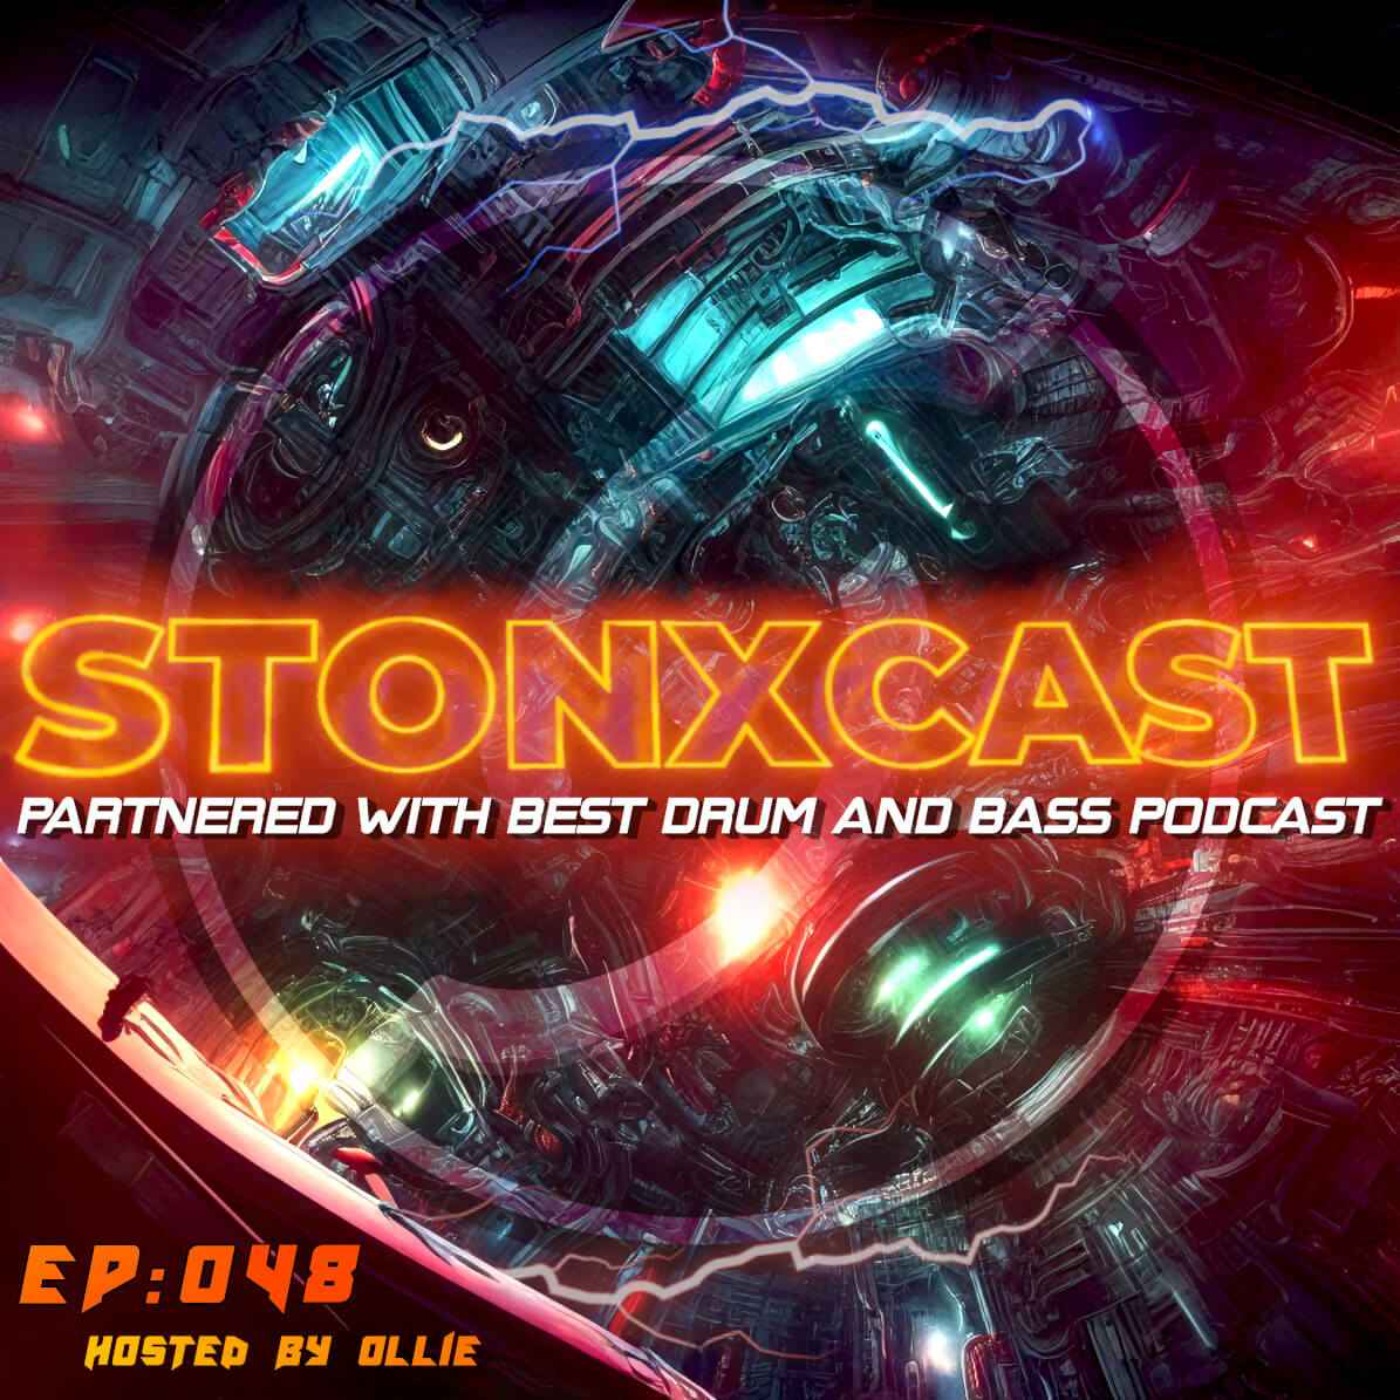 Stonxcast EP:048 - Hosted by Ollie Artwork